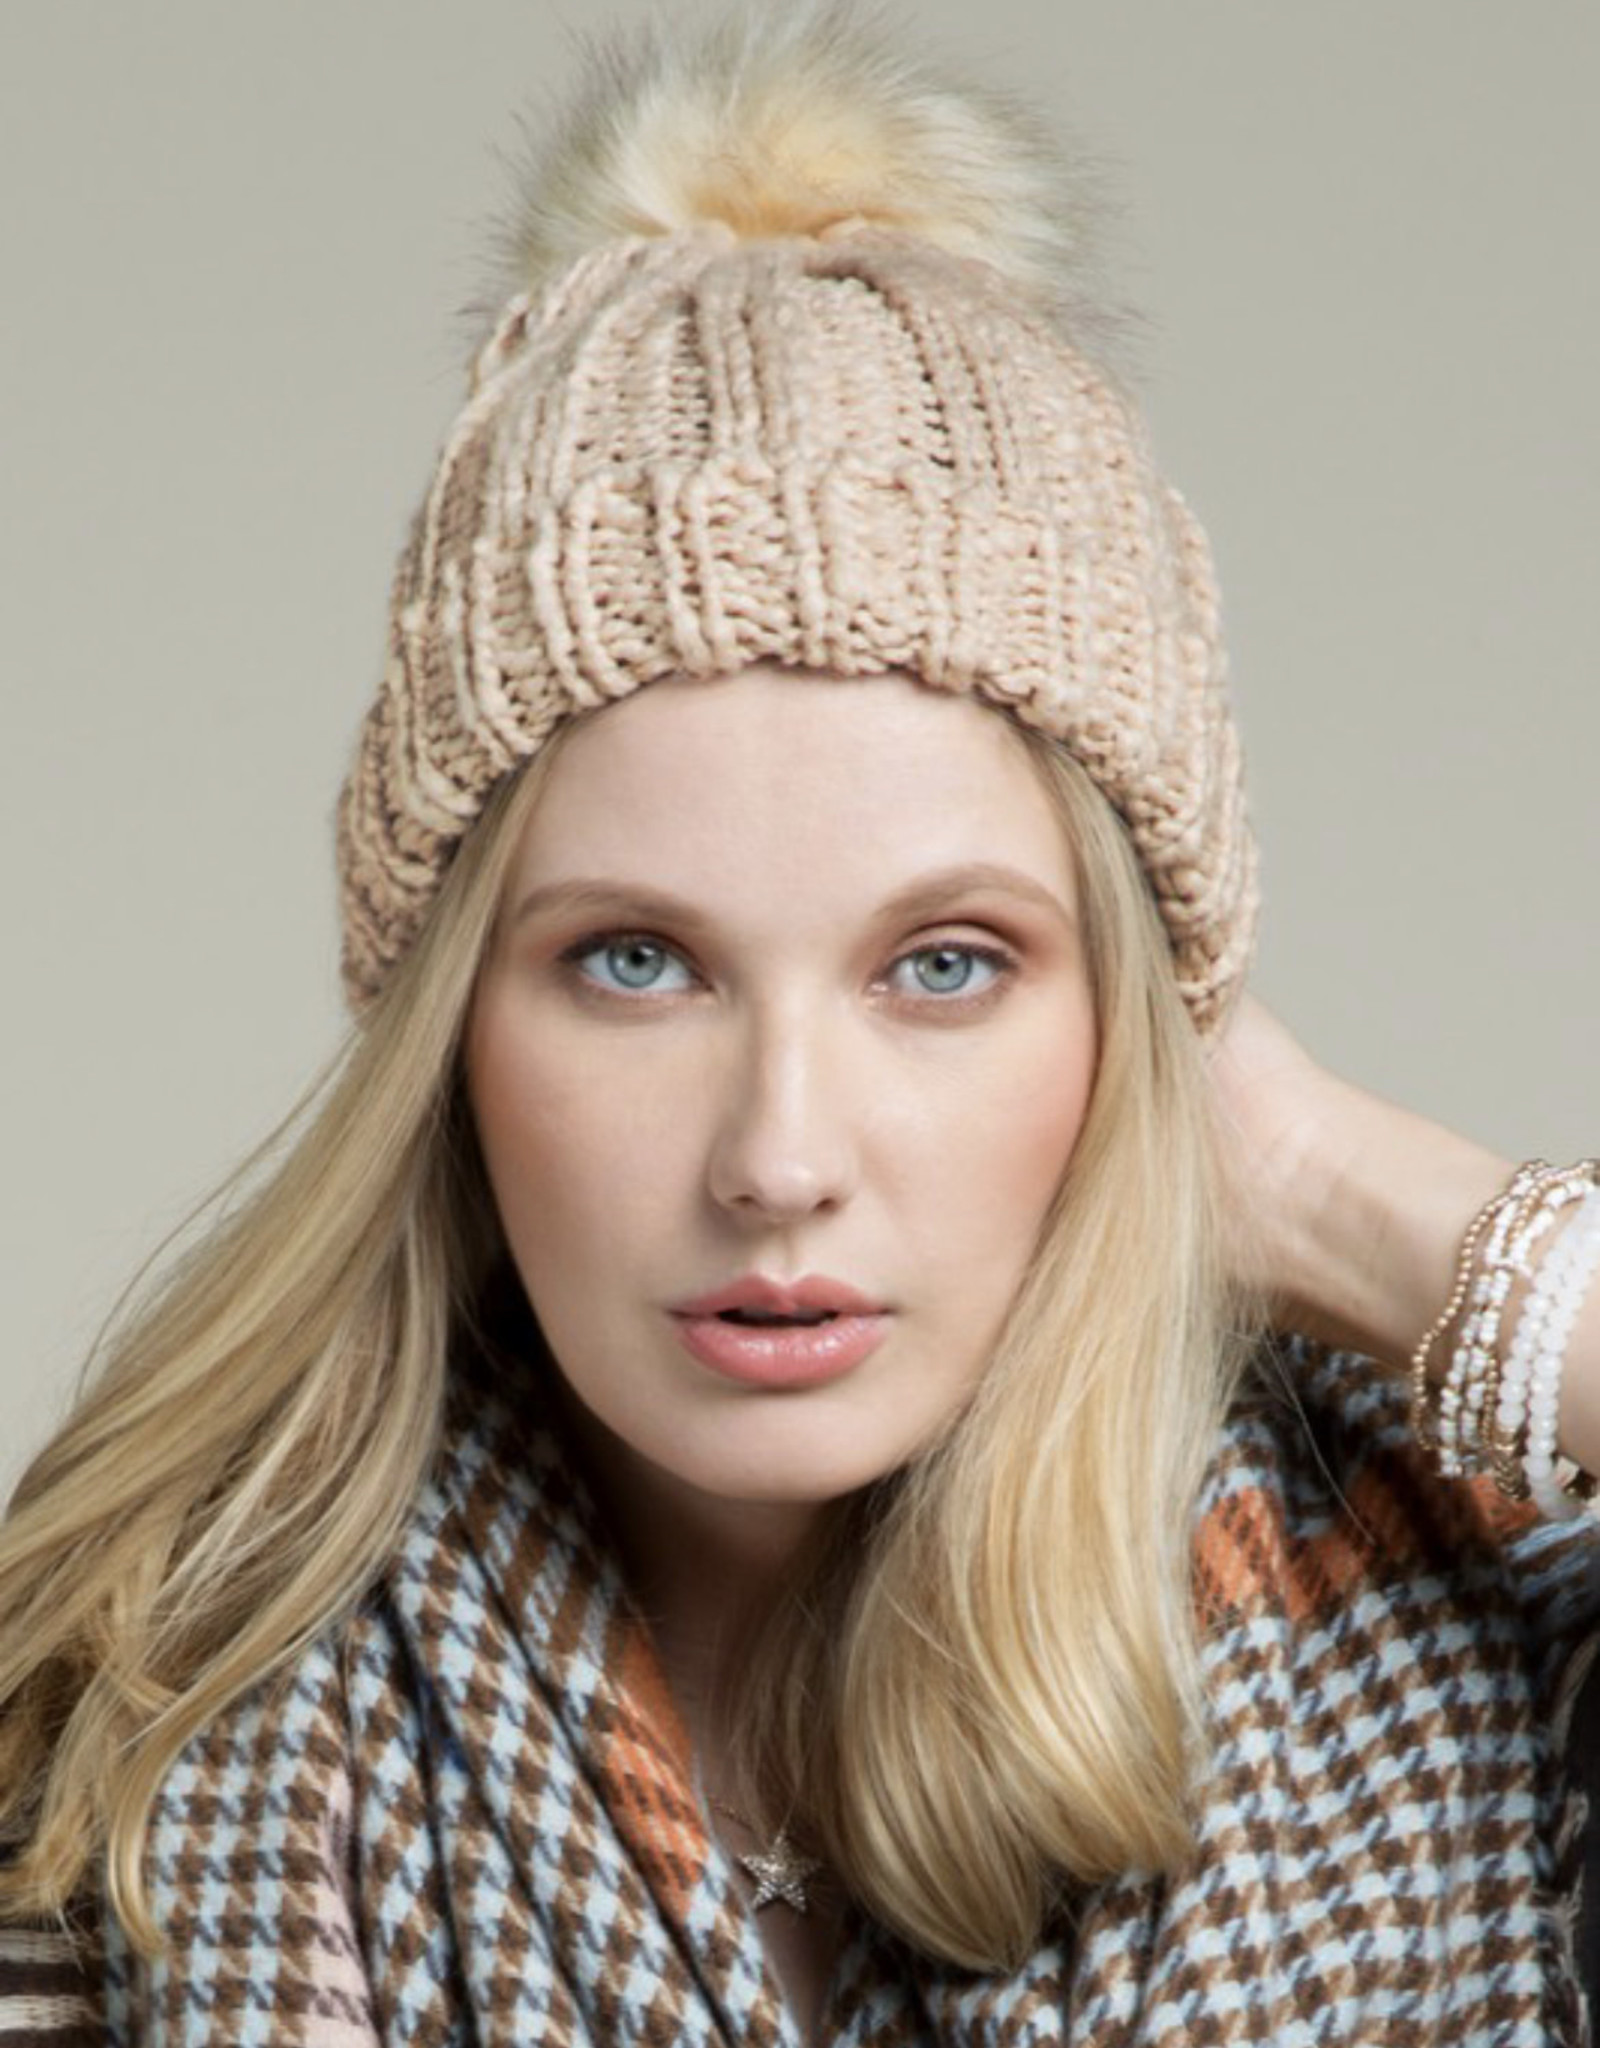 Soft Cable Knit Beanie in Peach